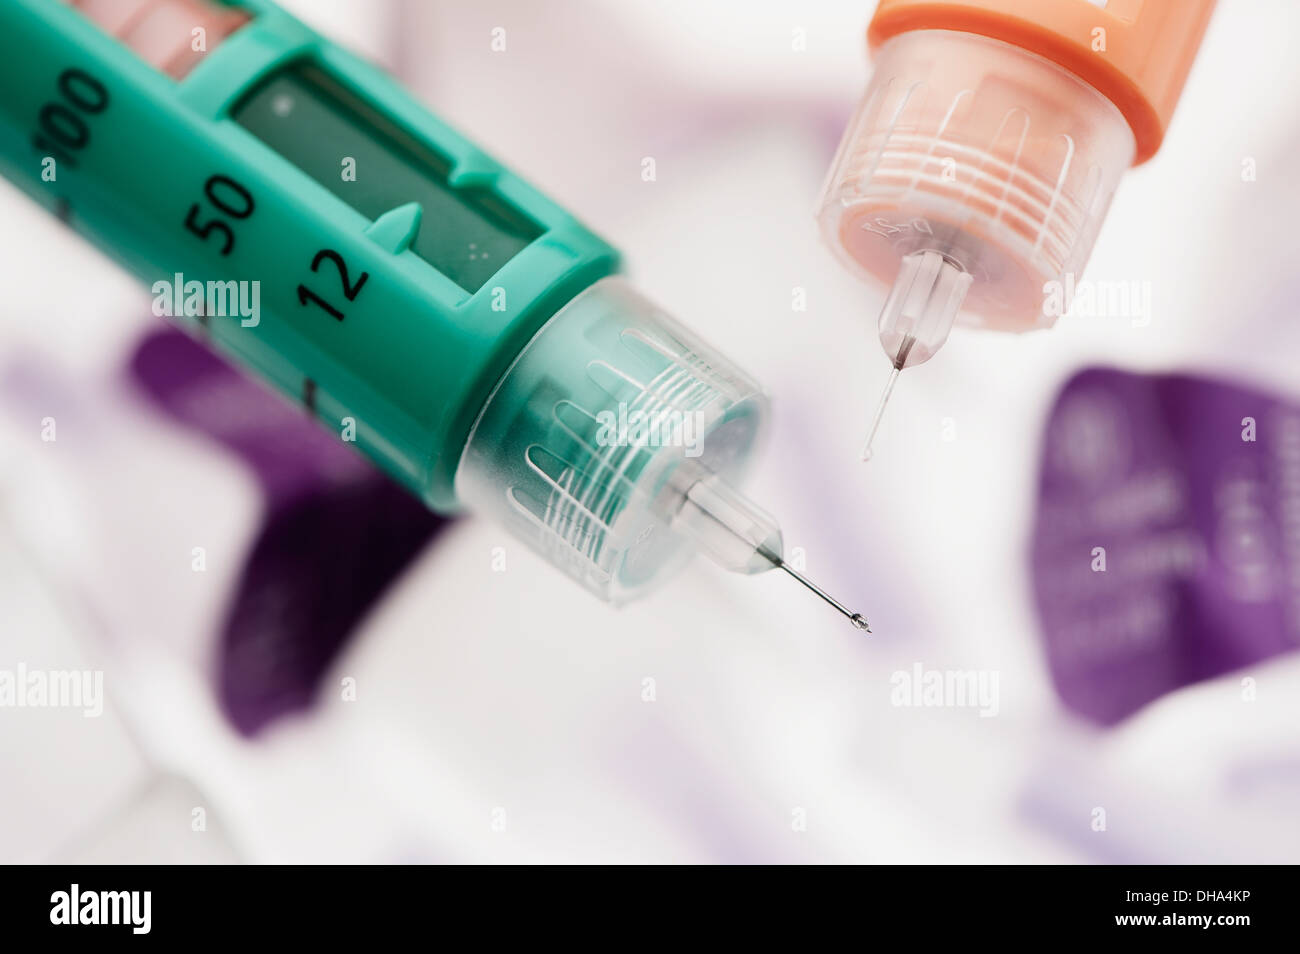 Insulin Pen With Needles Attached And Insulin Seen Coming Out Of One Of Them; California, United States Of America Stock Photo